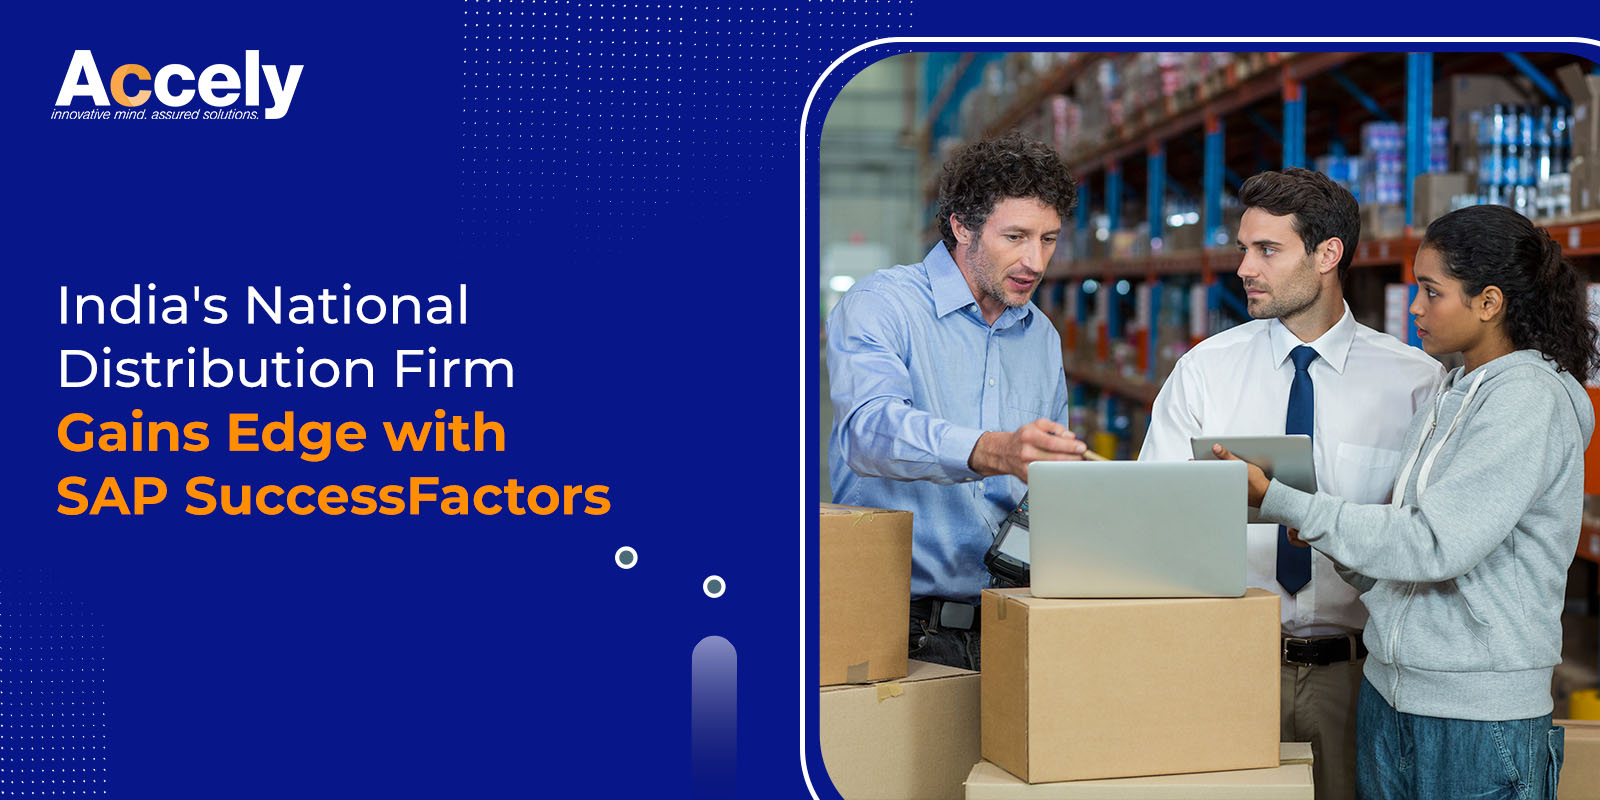 India's National Distribution Firm Gains Edge with SAP SuccessFactors